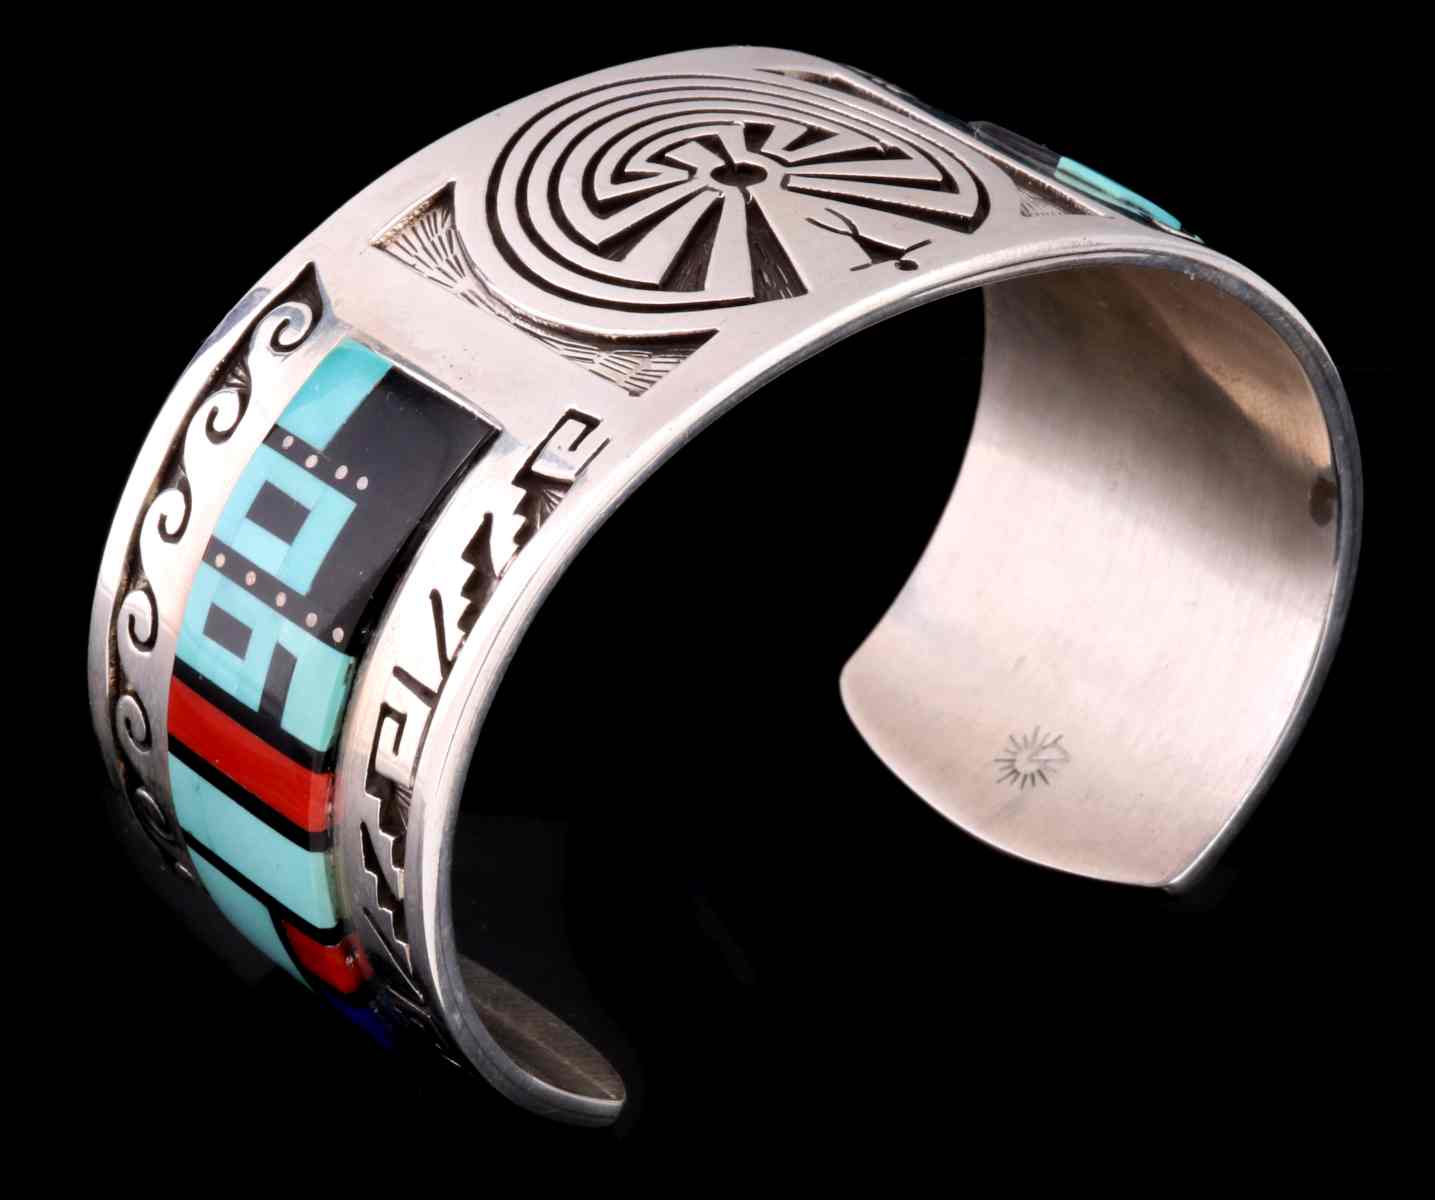 AN INLAID CALVIN PETERSON MAN IN THE MAZE BRACELET